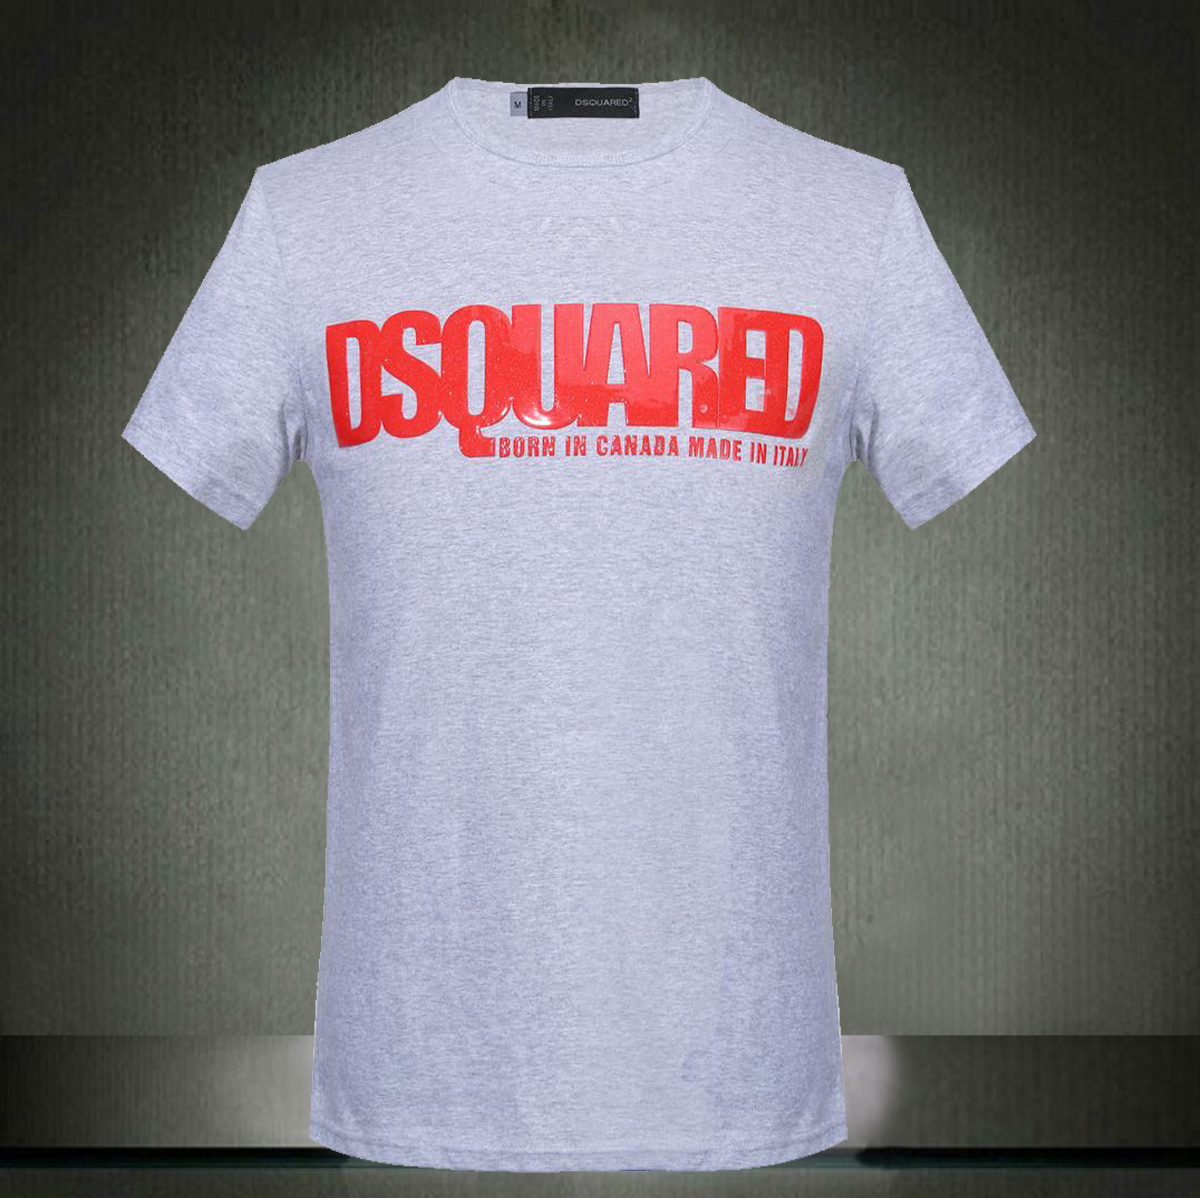 t shirt dsquared2 homme 2017